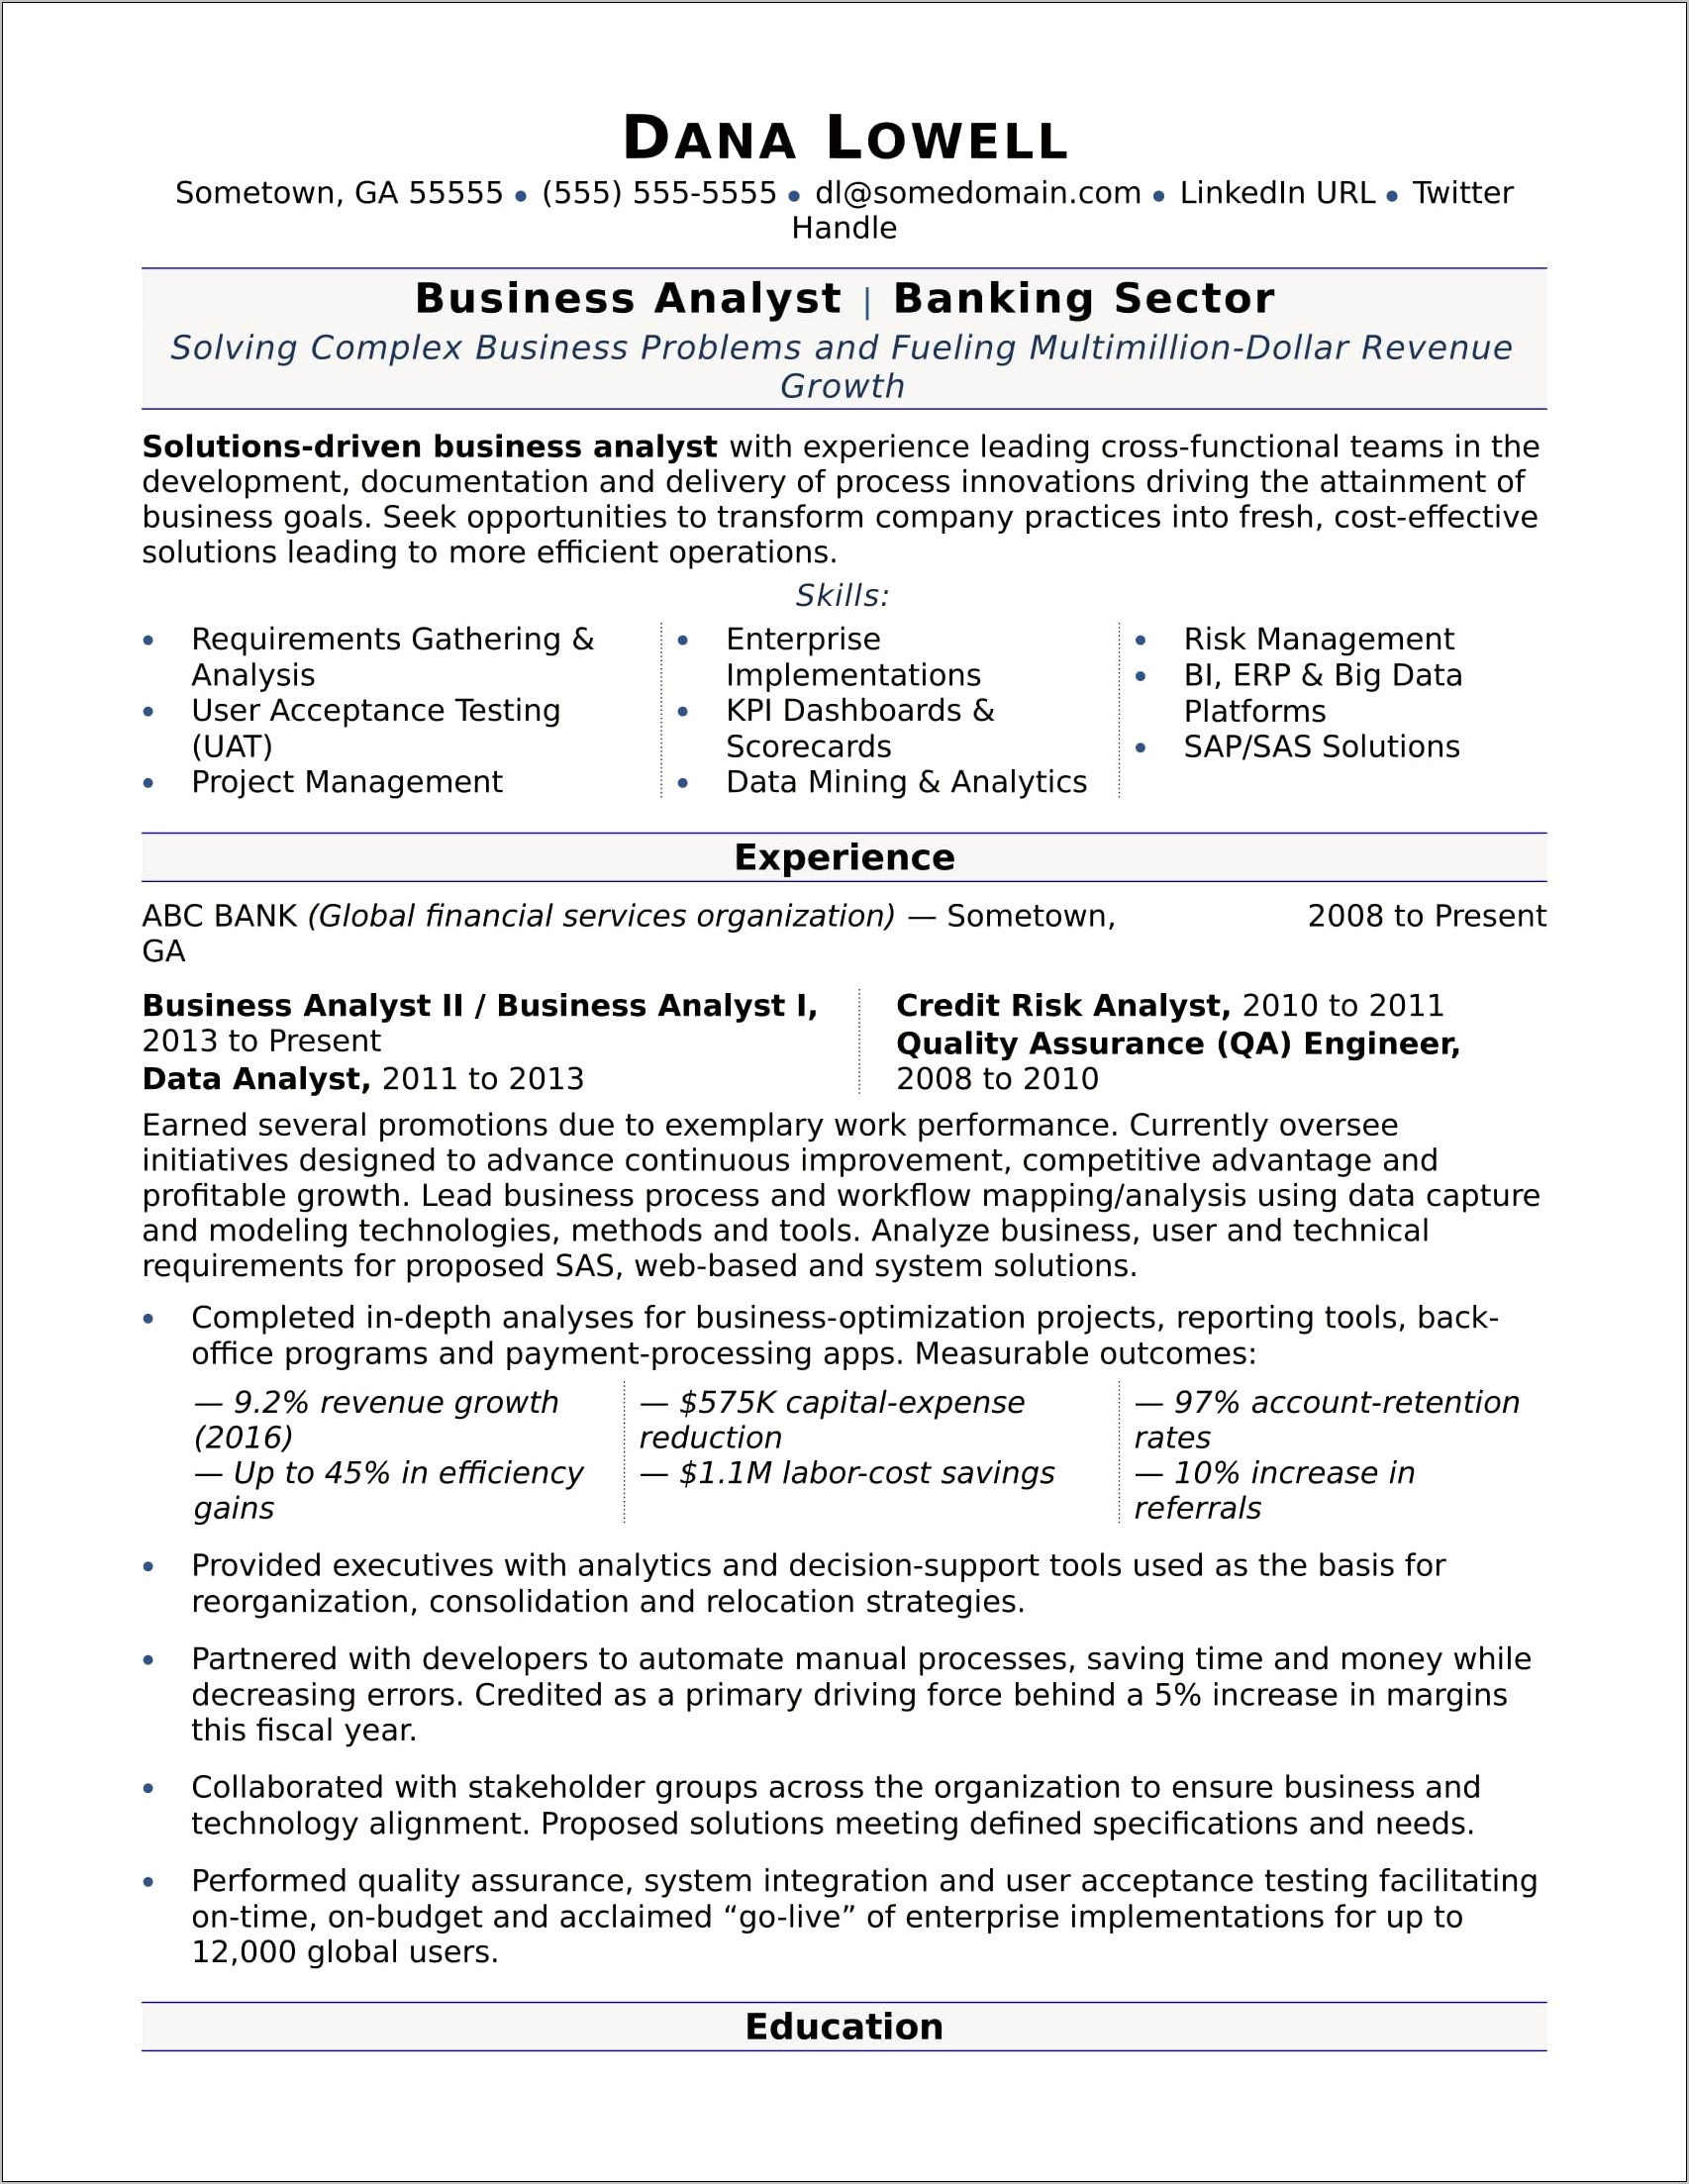 Data Analyst In Banking Sector Sample Resume